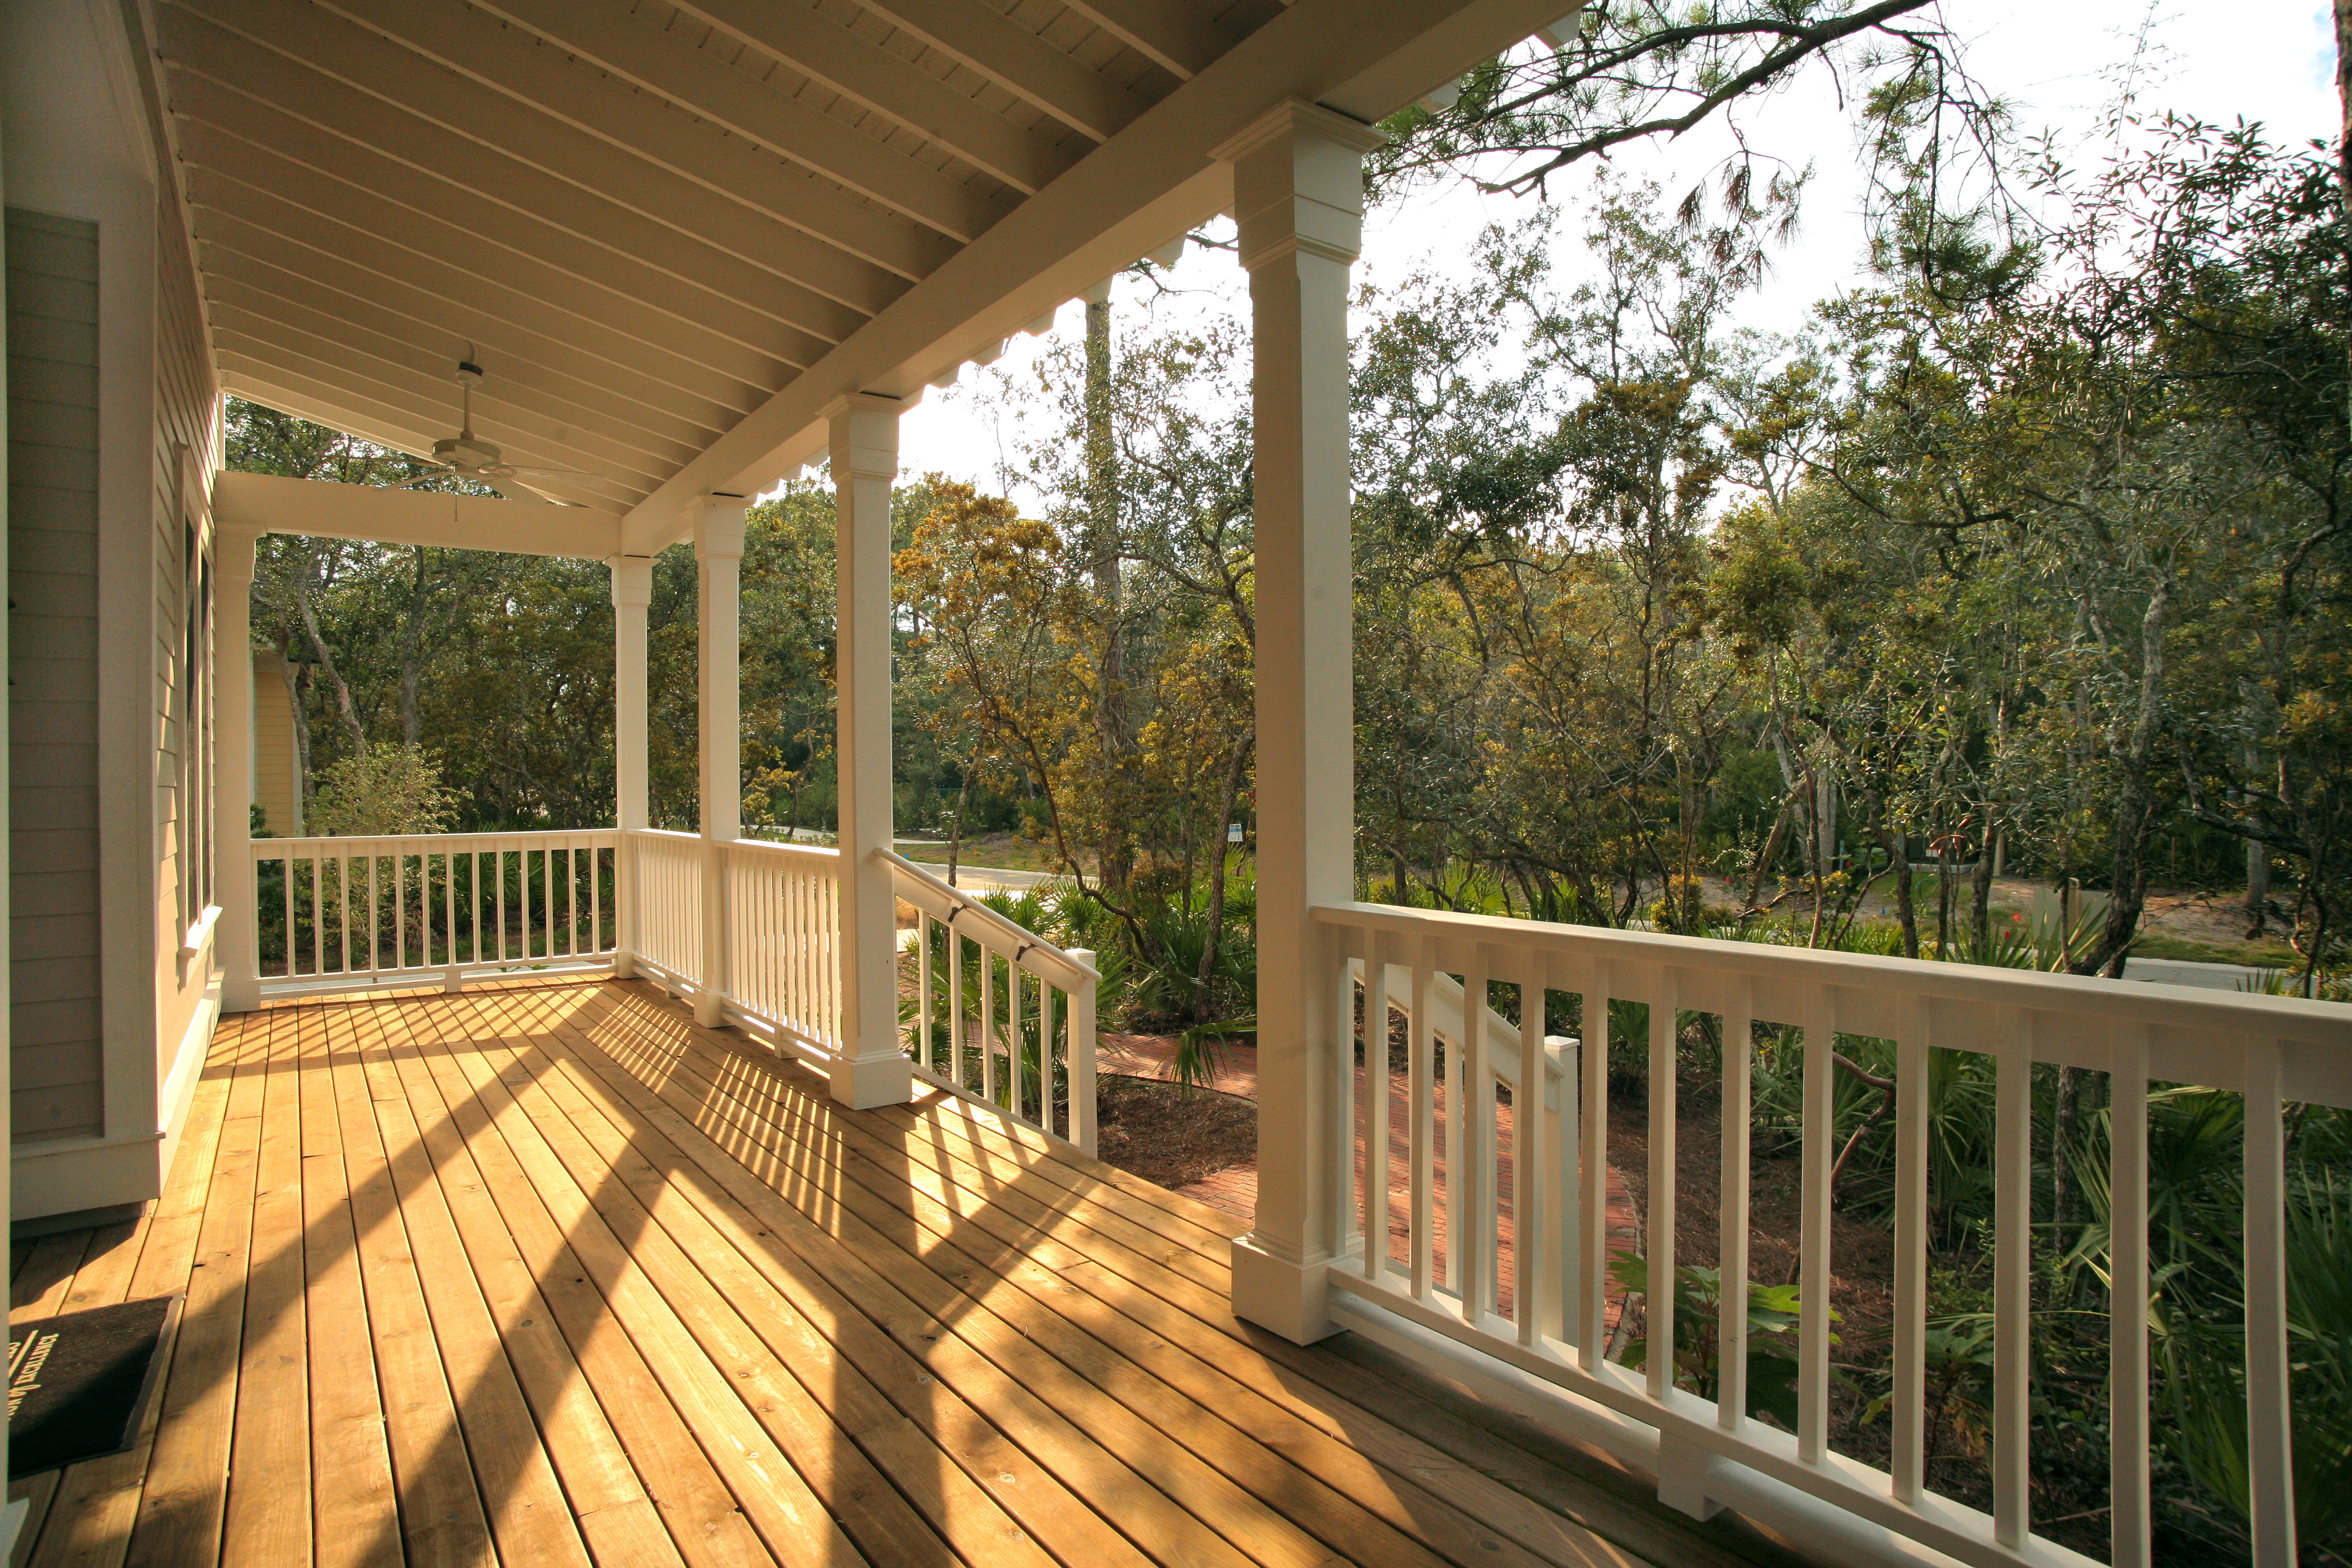 View Our Deck & Patio Remodeling Services